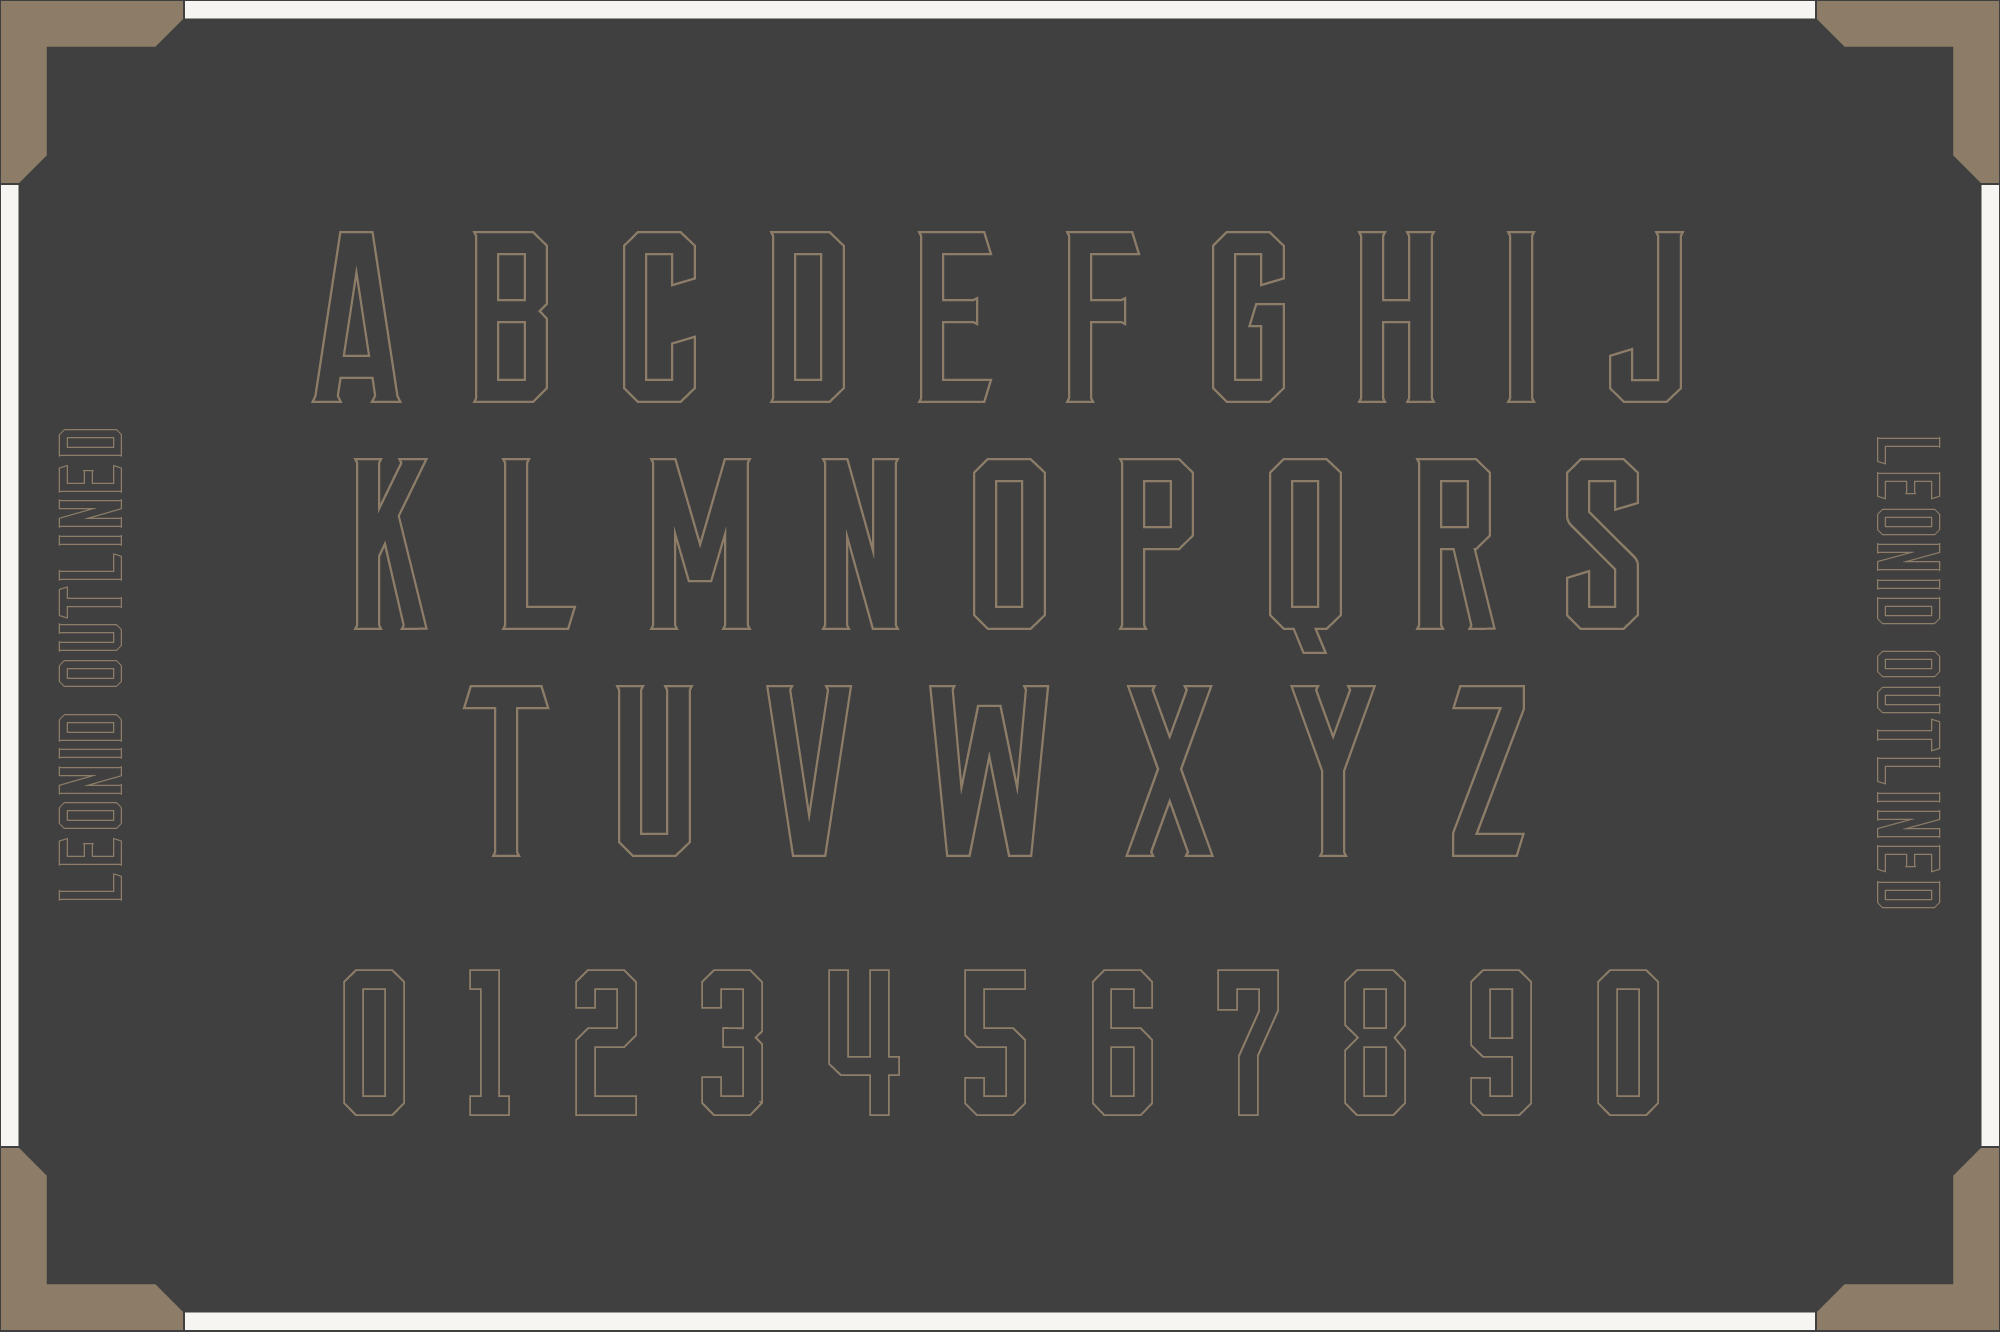 Leonid Outlined Font preview